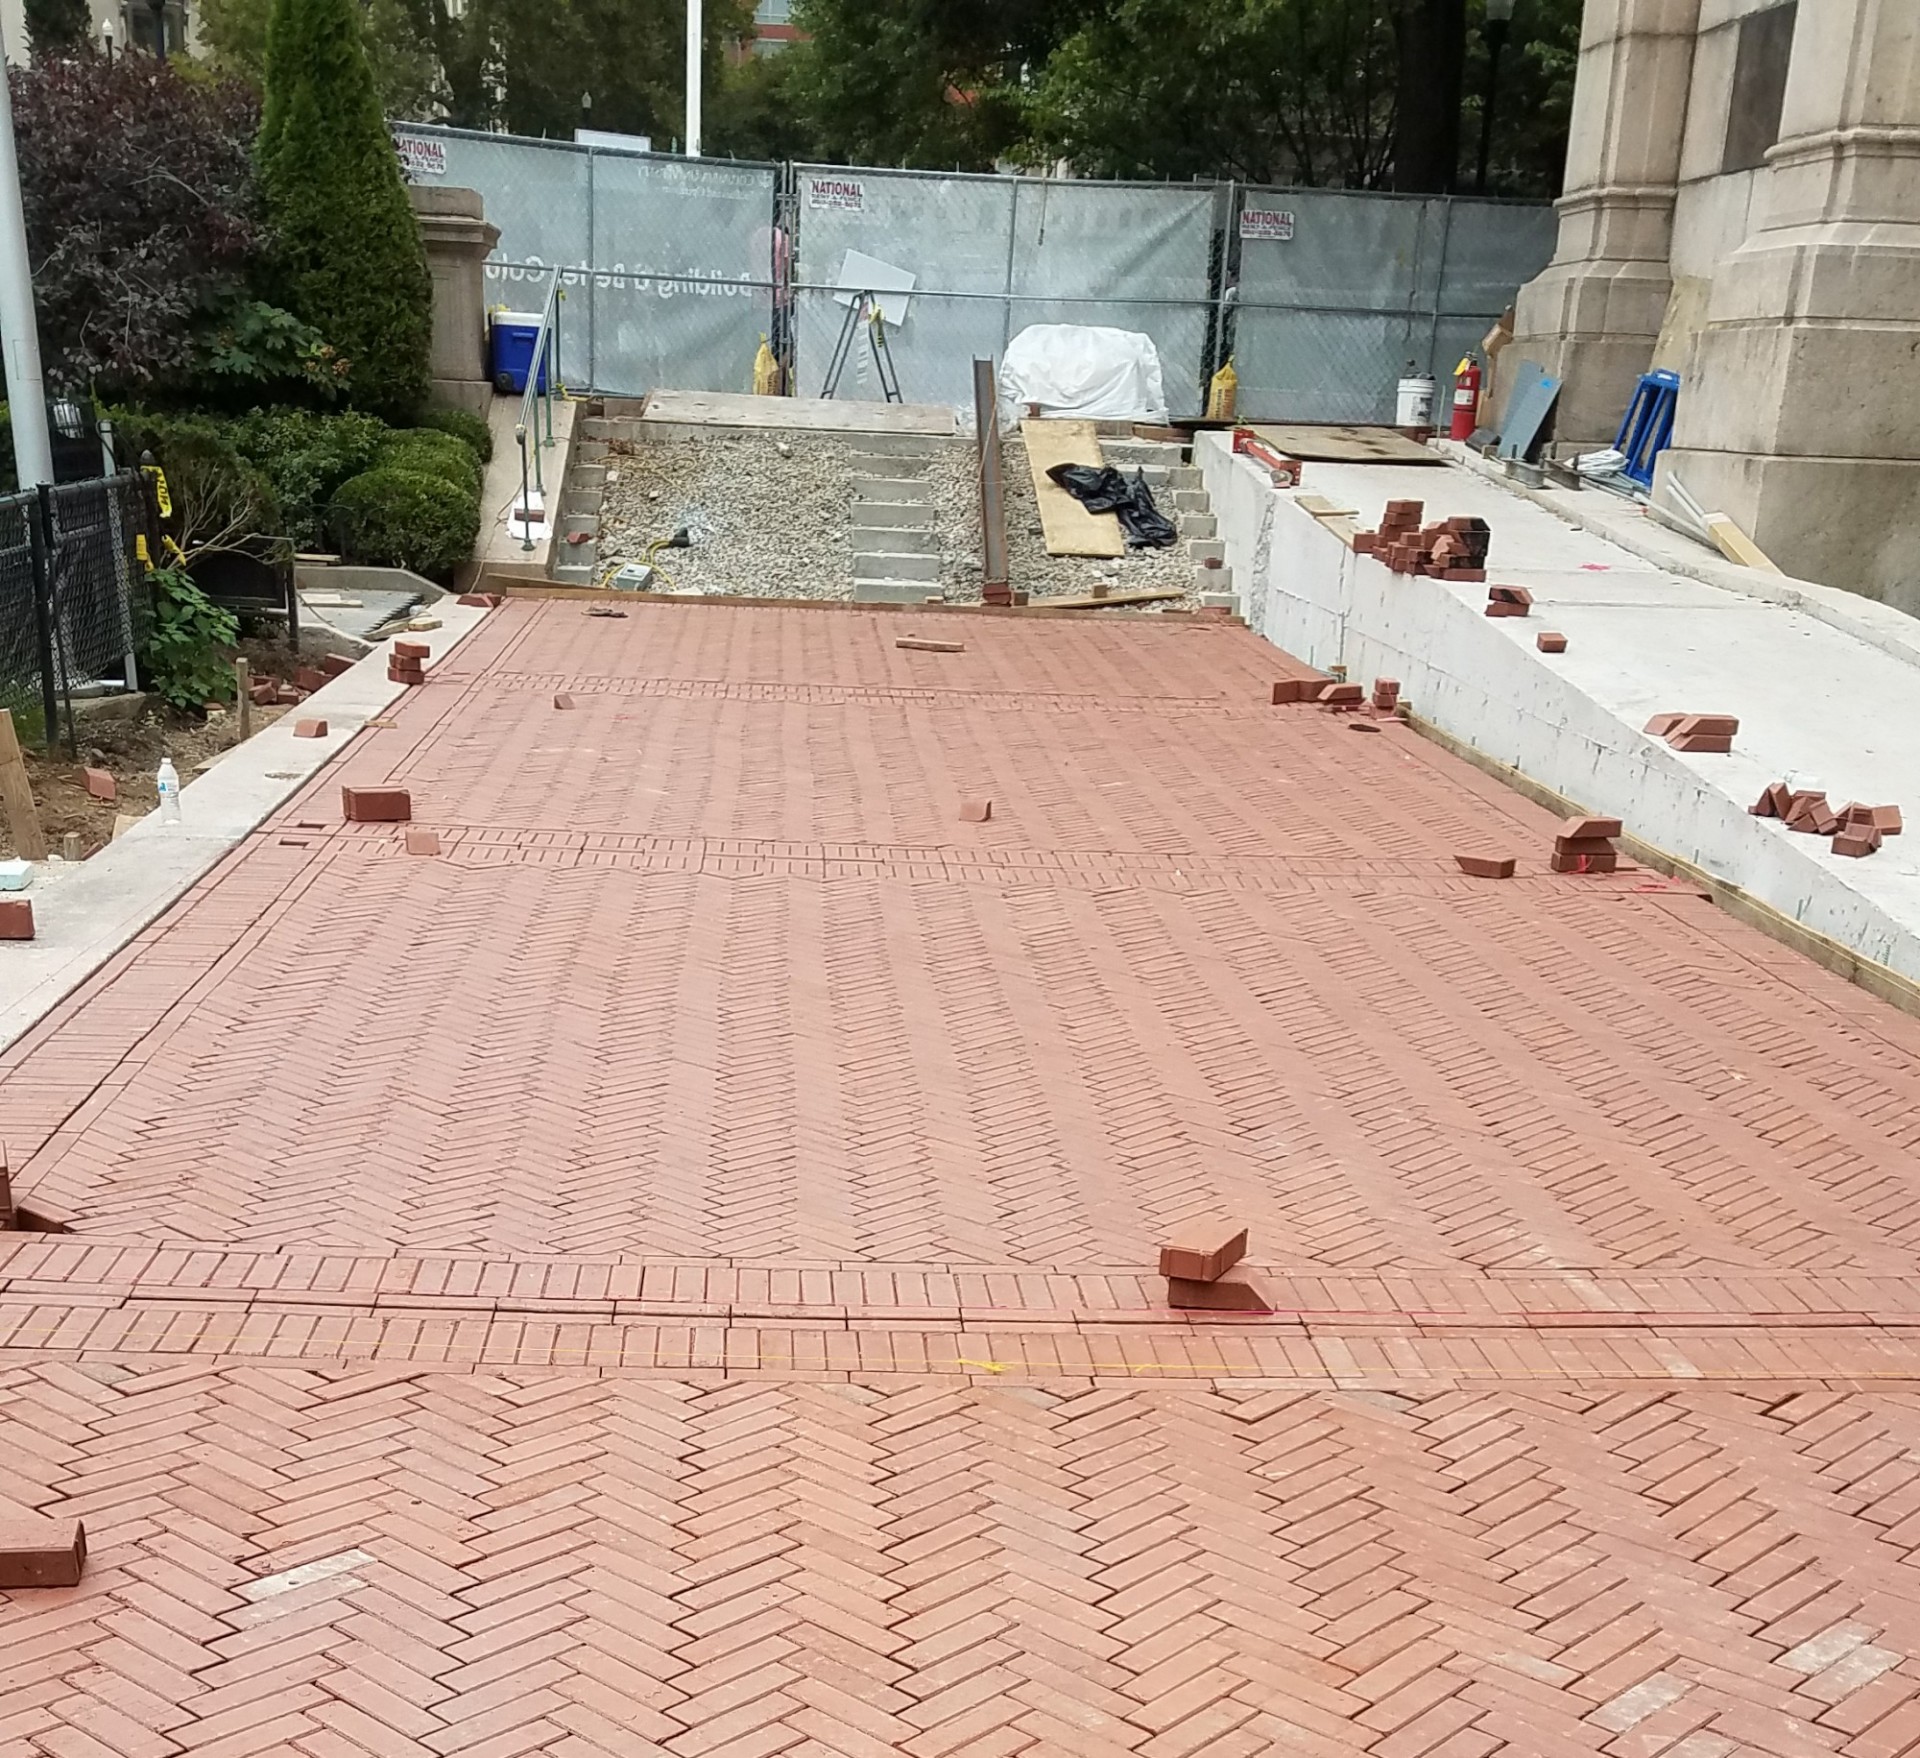 The Lower Campus accessibility ramp project includes the replacement of granite stairs and brick pathway. 